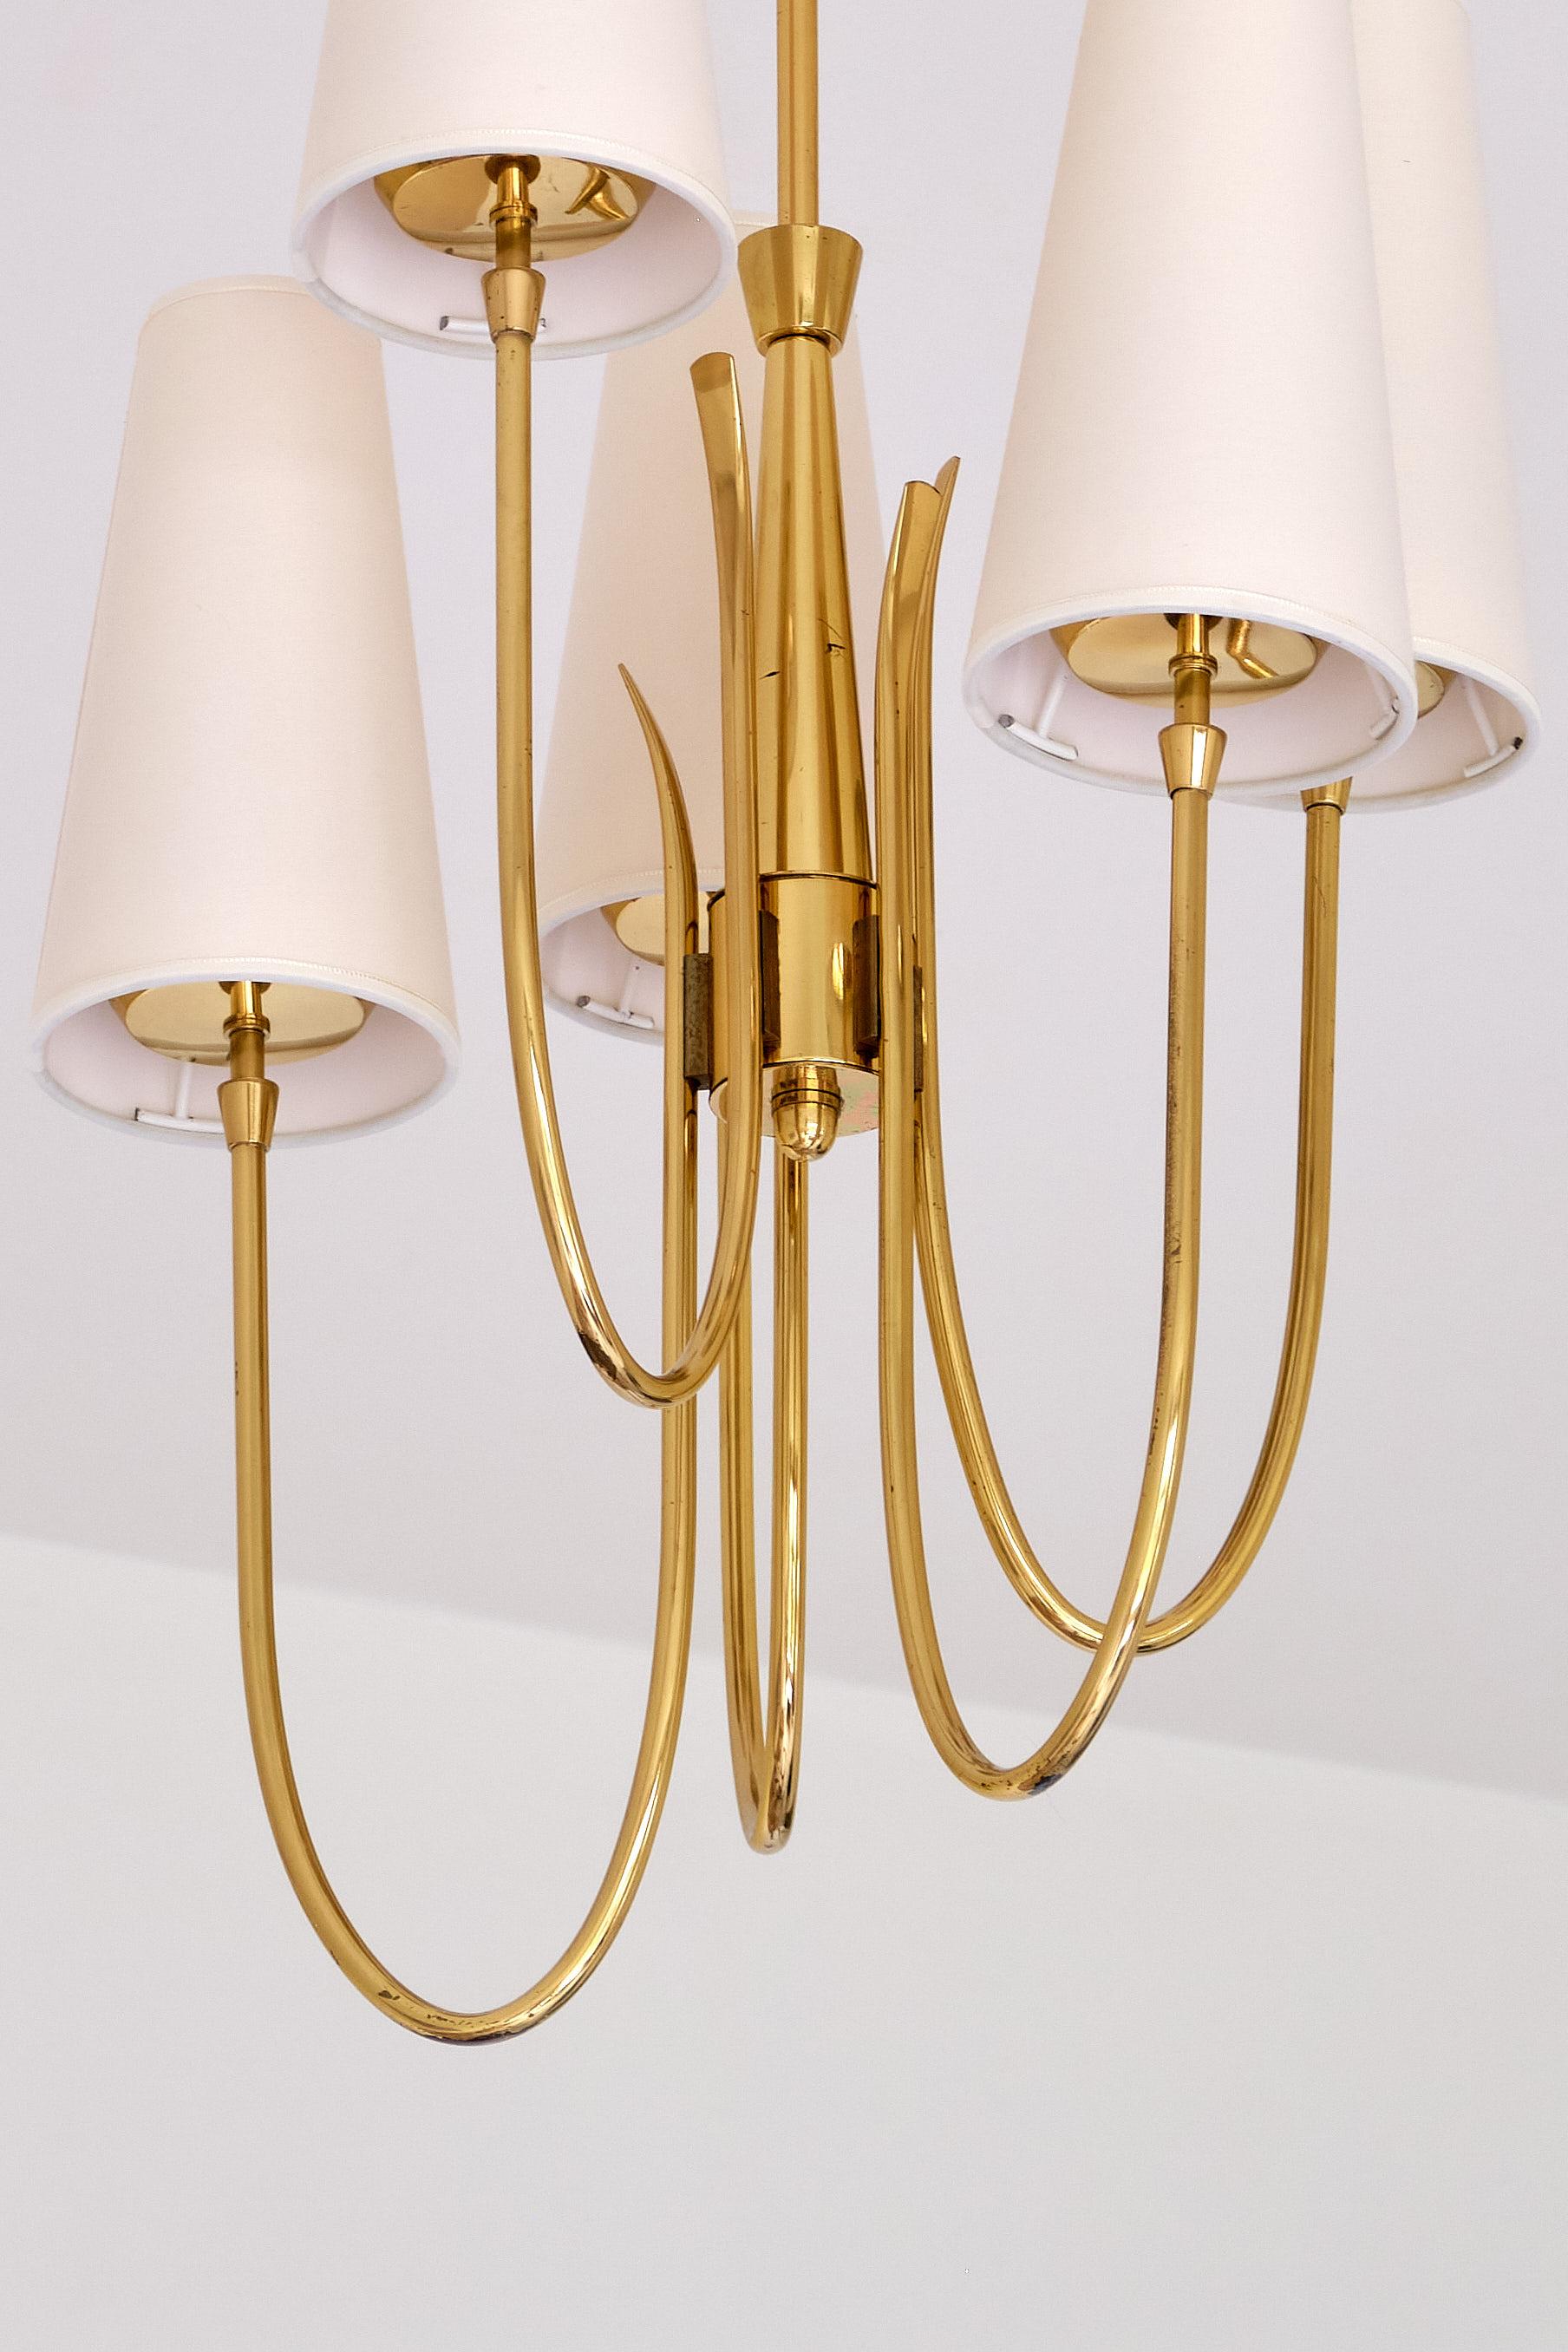 Guglielmo Ulrich Attributed Five Arm Chandelier, Brass and Fabric, Italy, 1940s 2